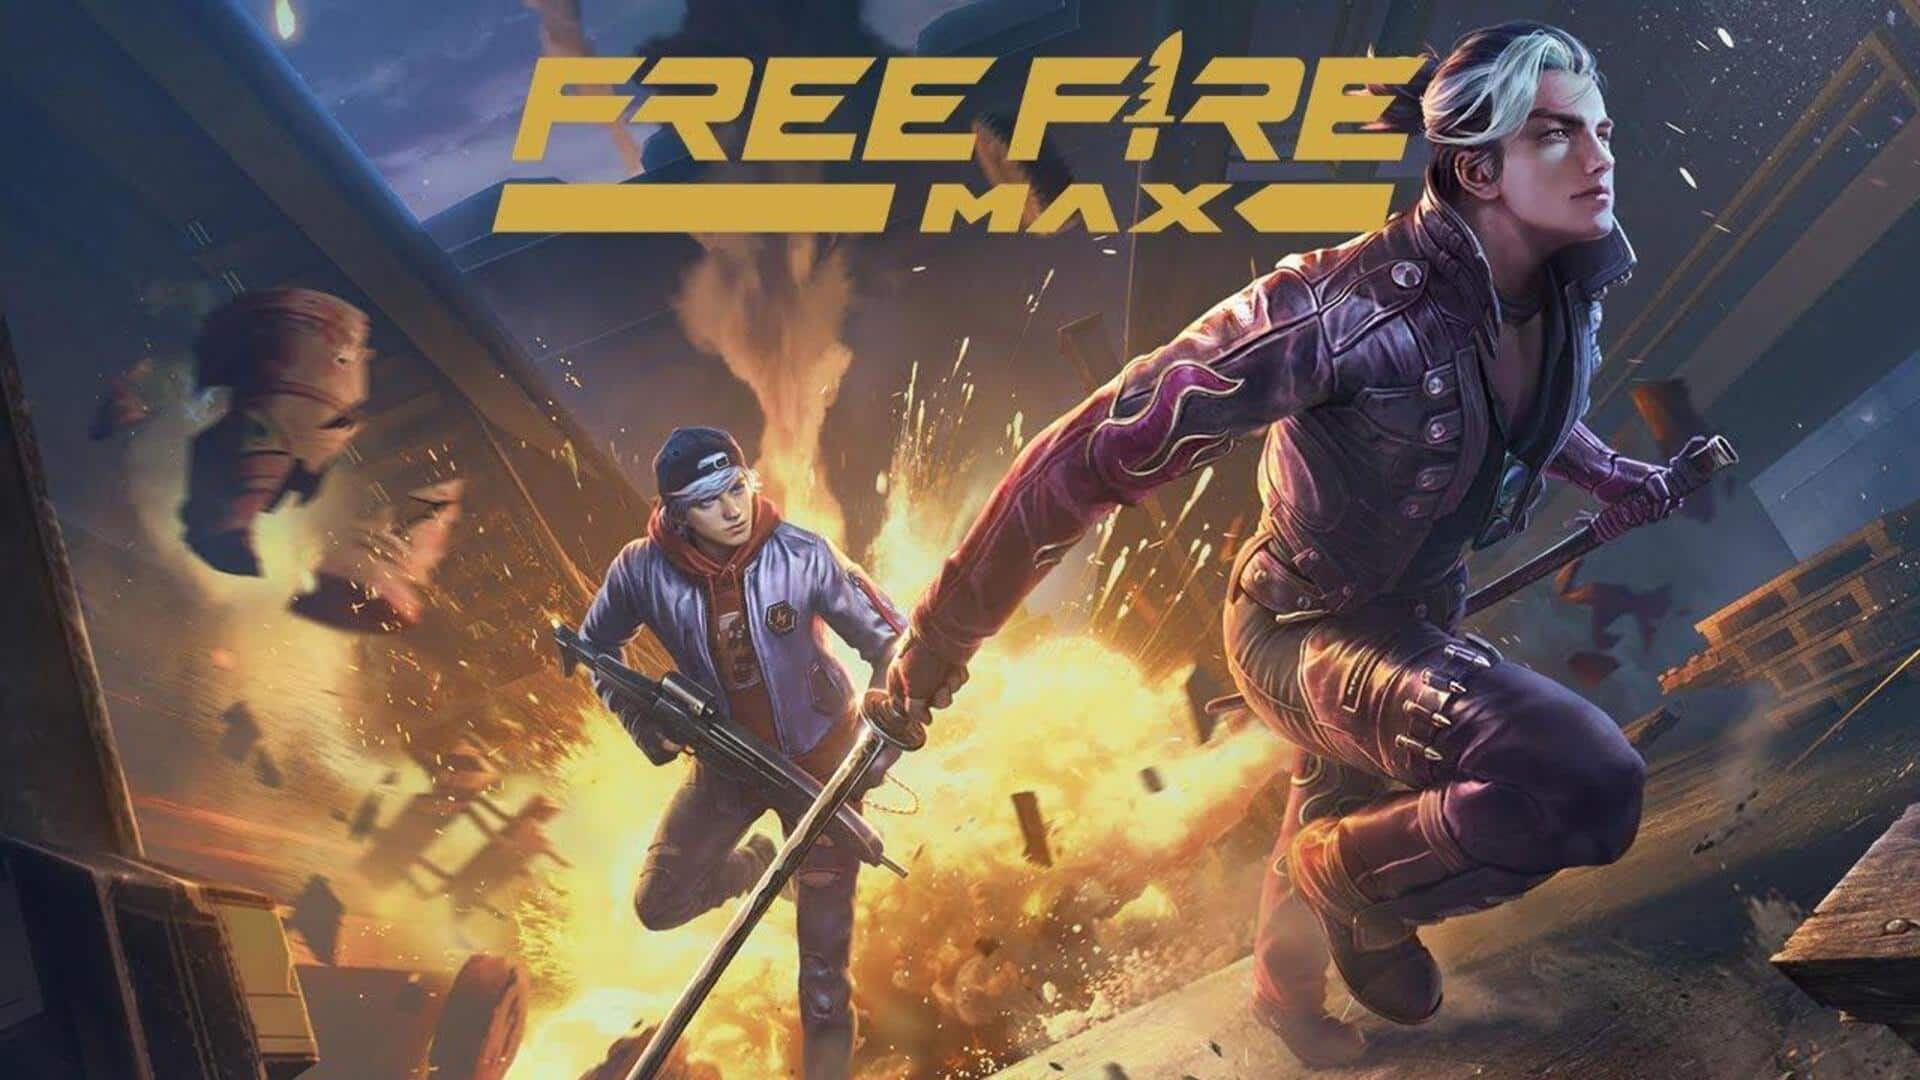 Free Fire MAX codes for April 7: How to redeem